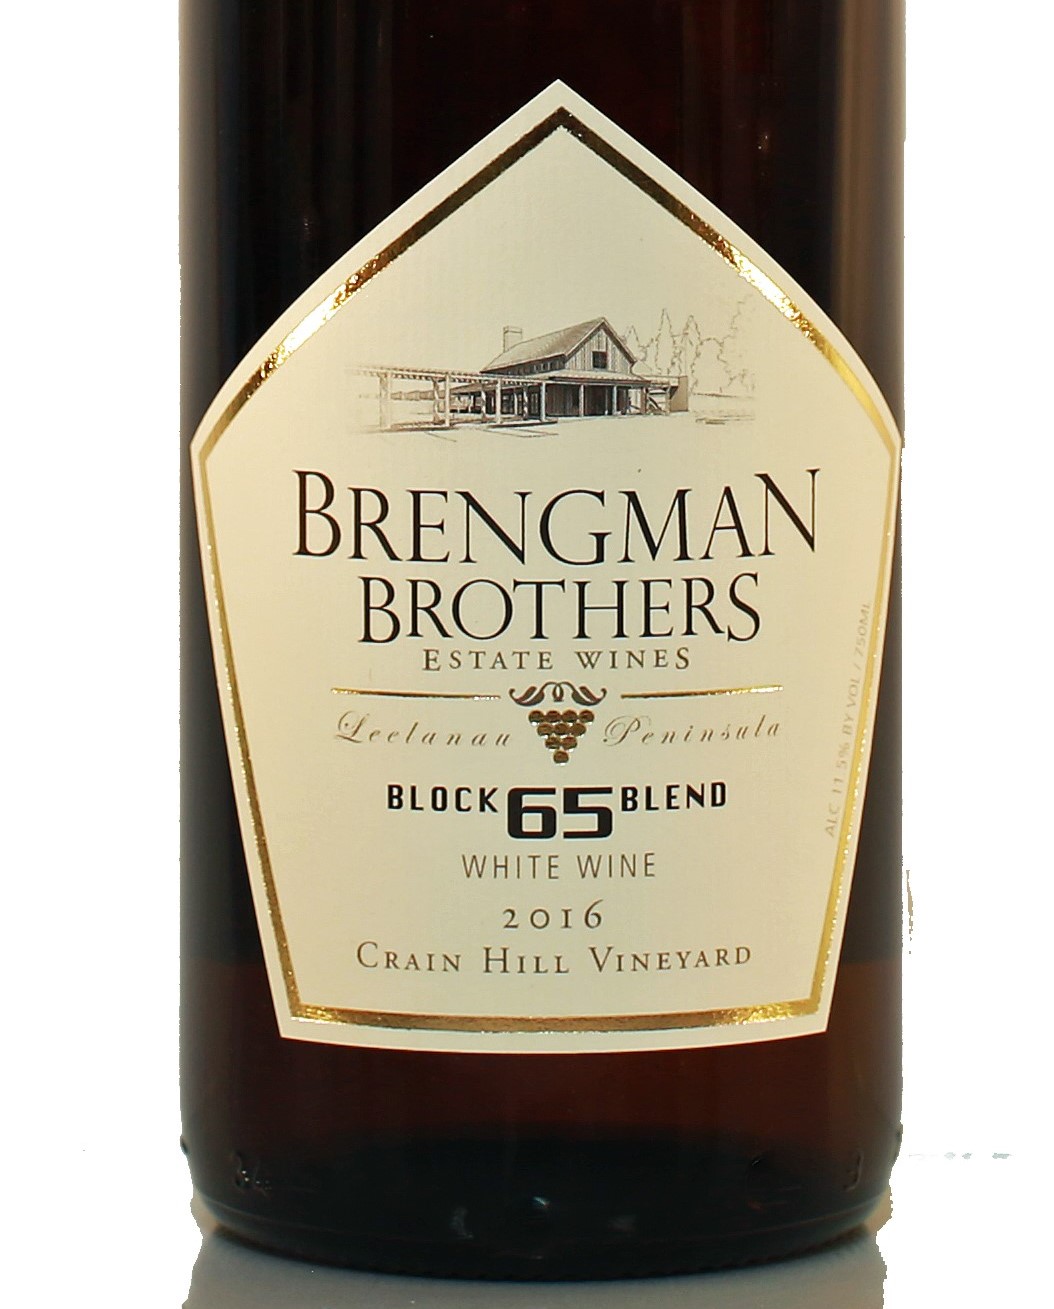 Image of a custom wine label for Brengman Brothers.